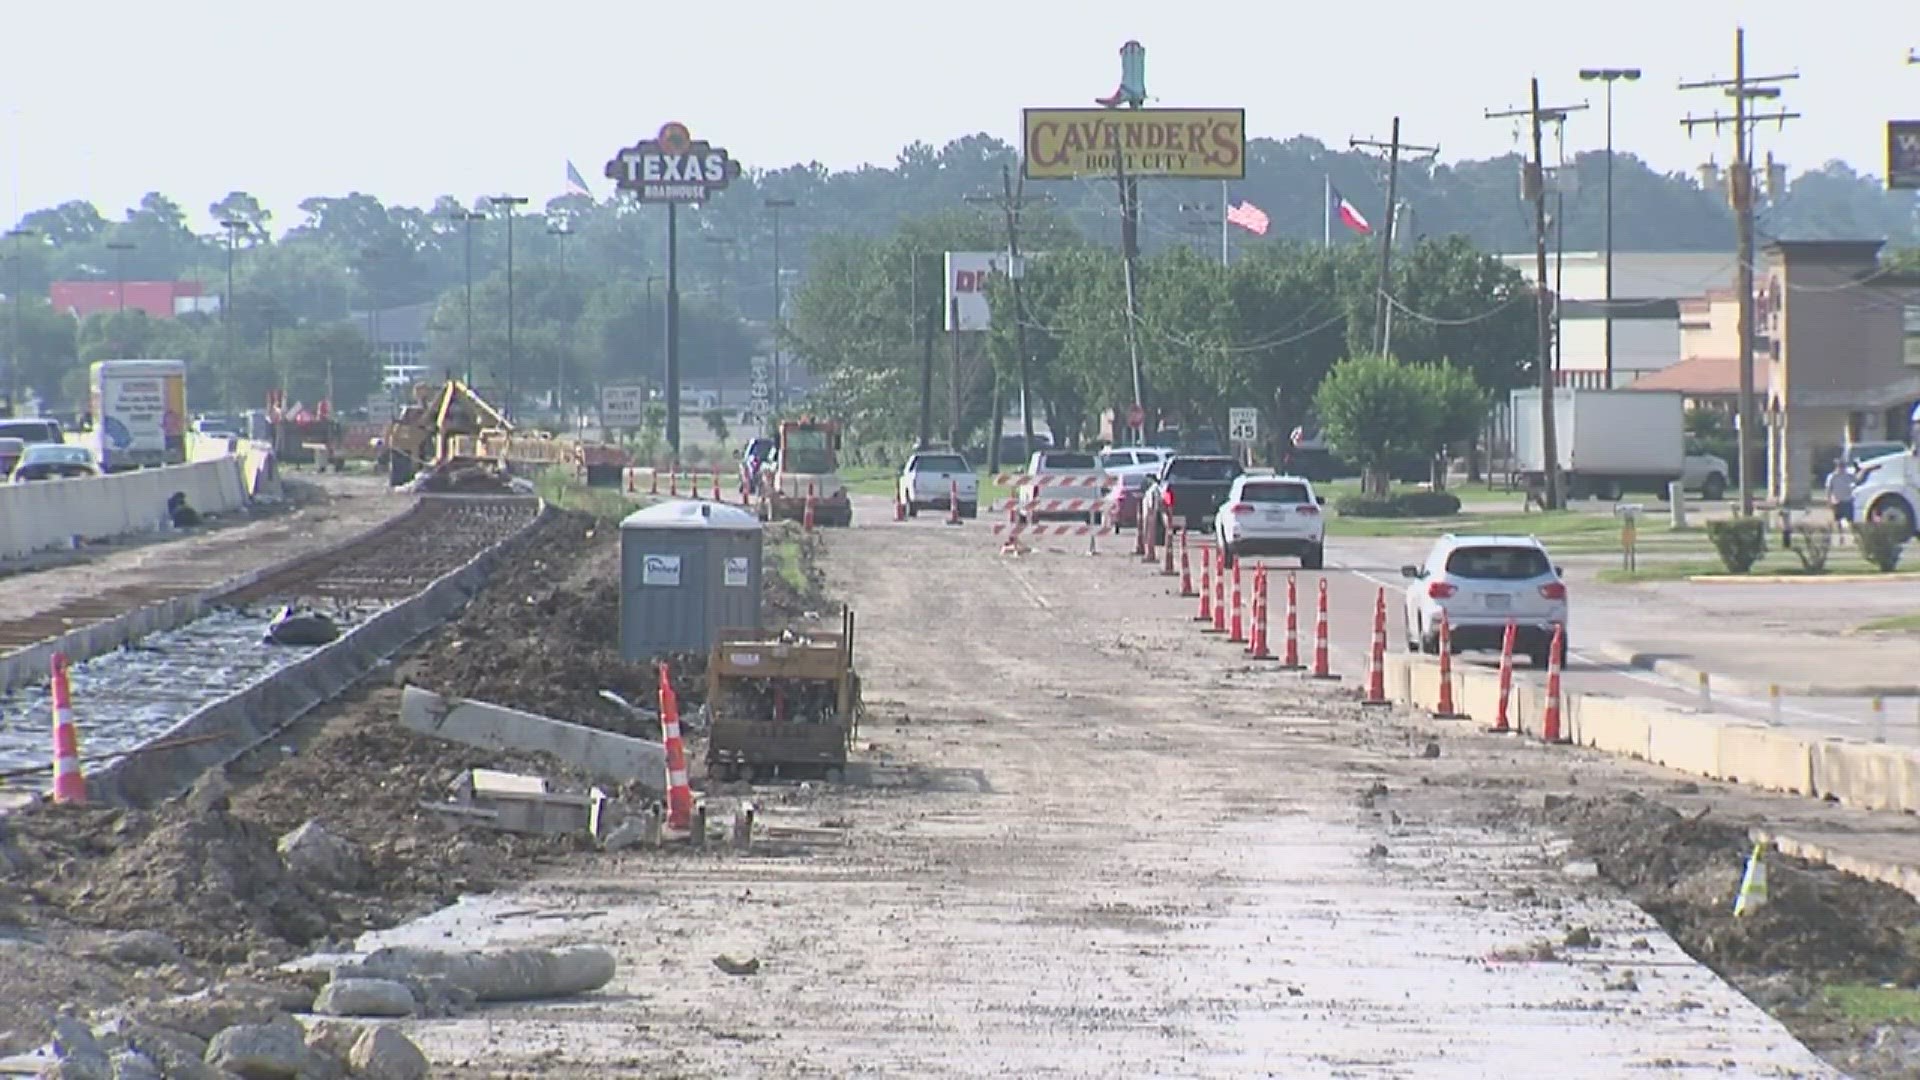 The exit has been closed since January, but TxDOT says it should open back up by the end of June.